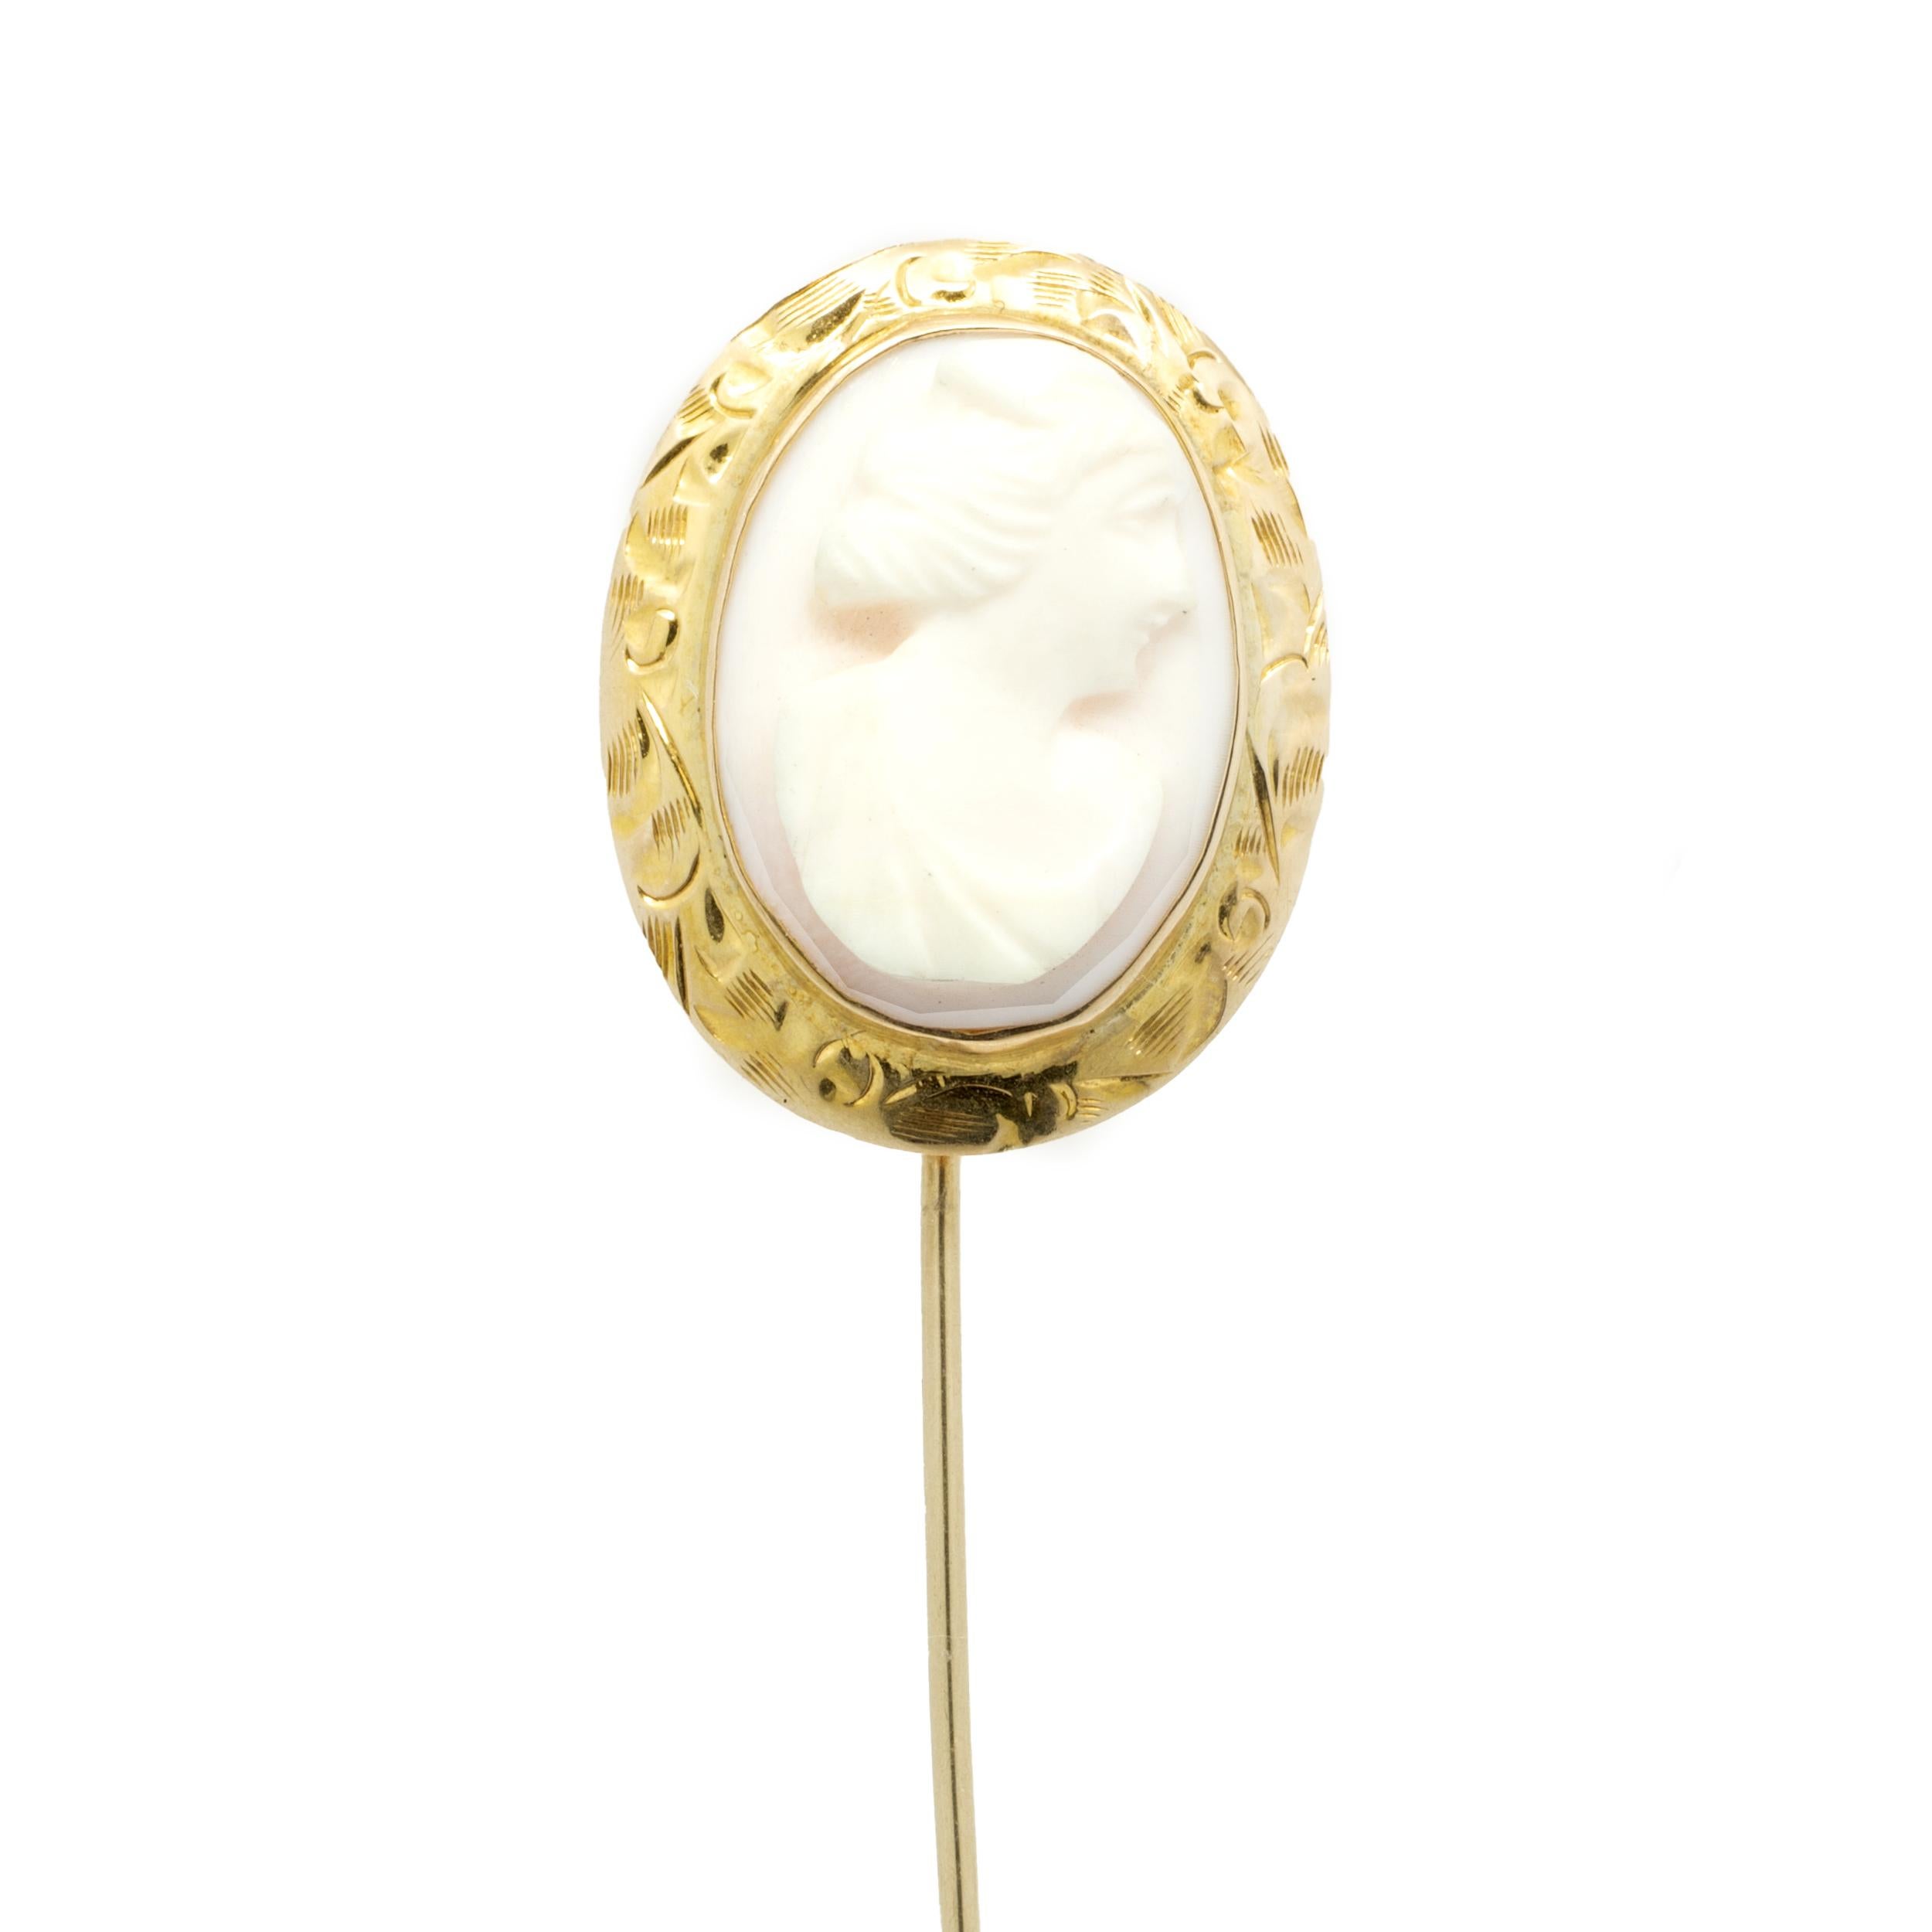 Designer: custom
Material: 10K yellow gold
Dimensions: cameo is approximately 22mm X 17.3mm
Weight: 2.51 grams
